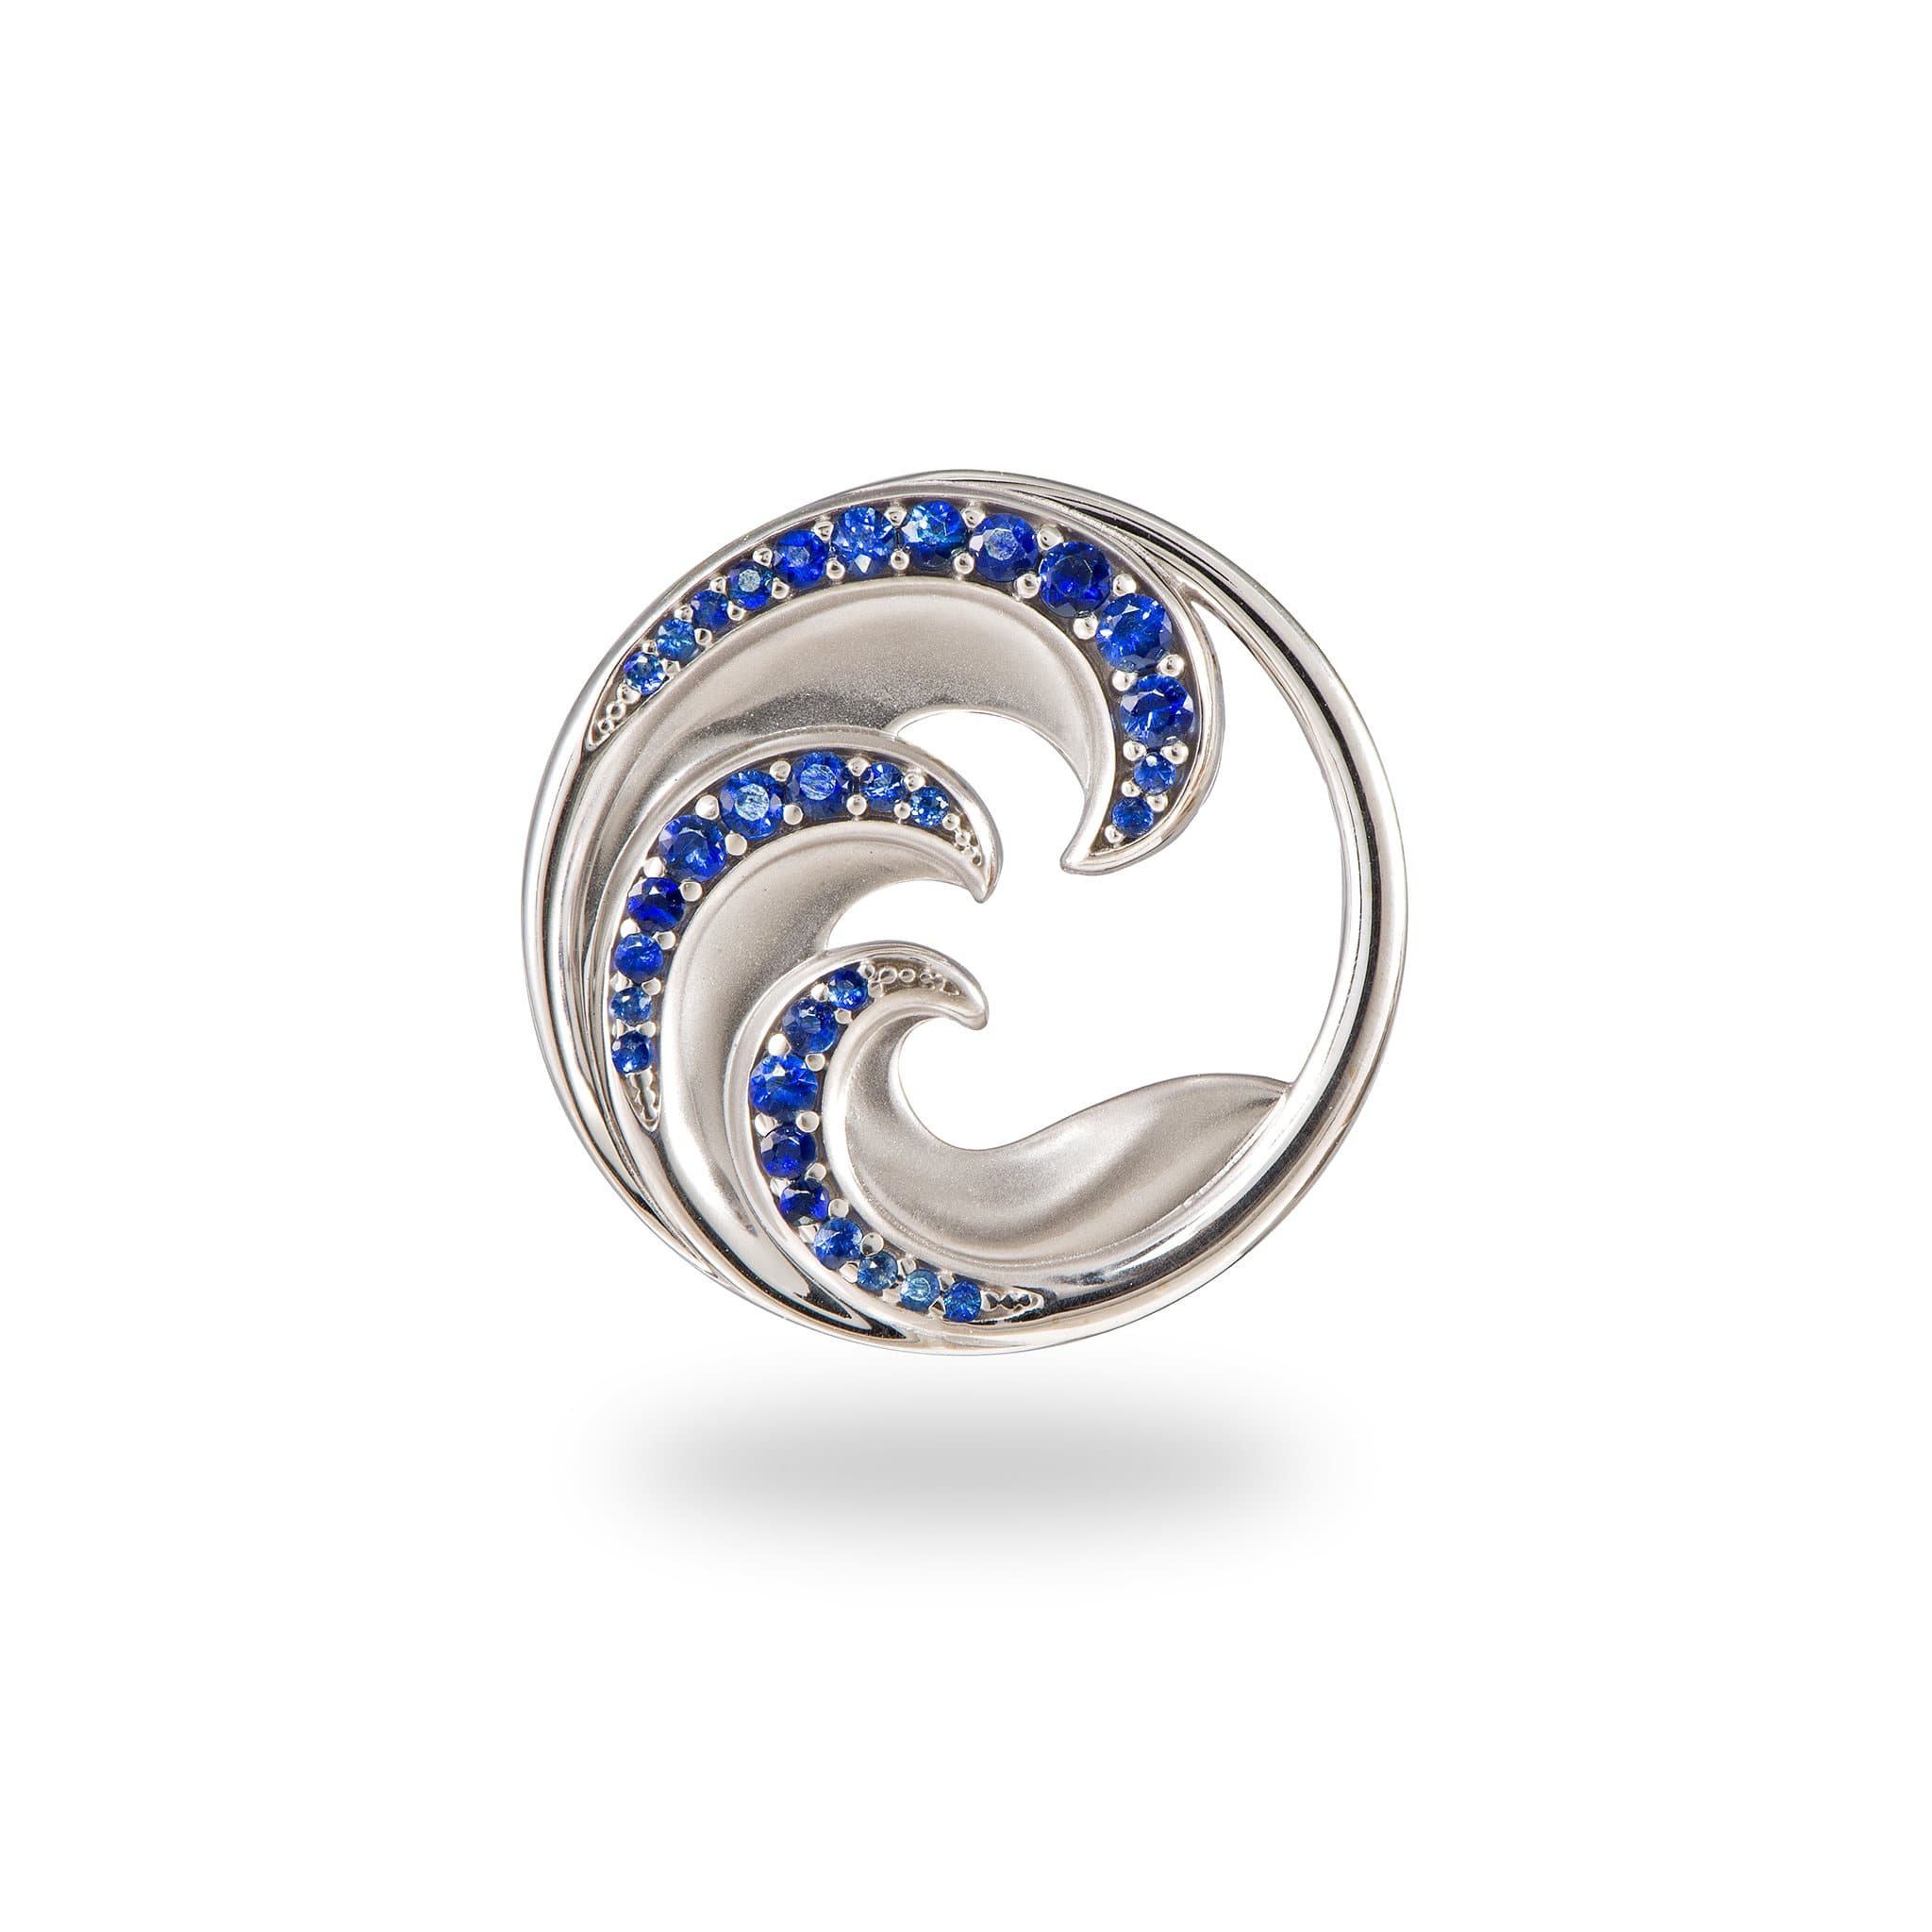 Nalu Pendant in White Gold with Blue Sapphires - 24mm-Maui Divers Jewelry